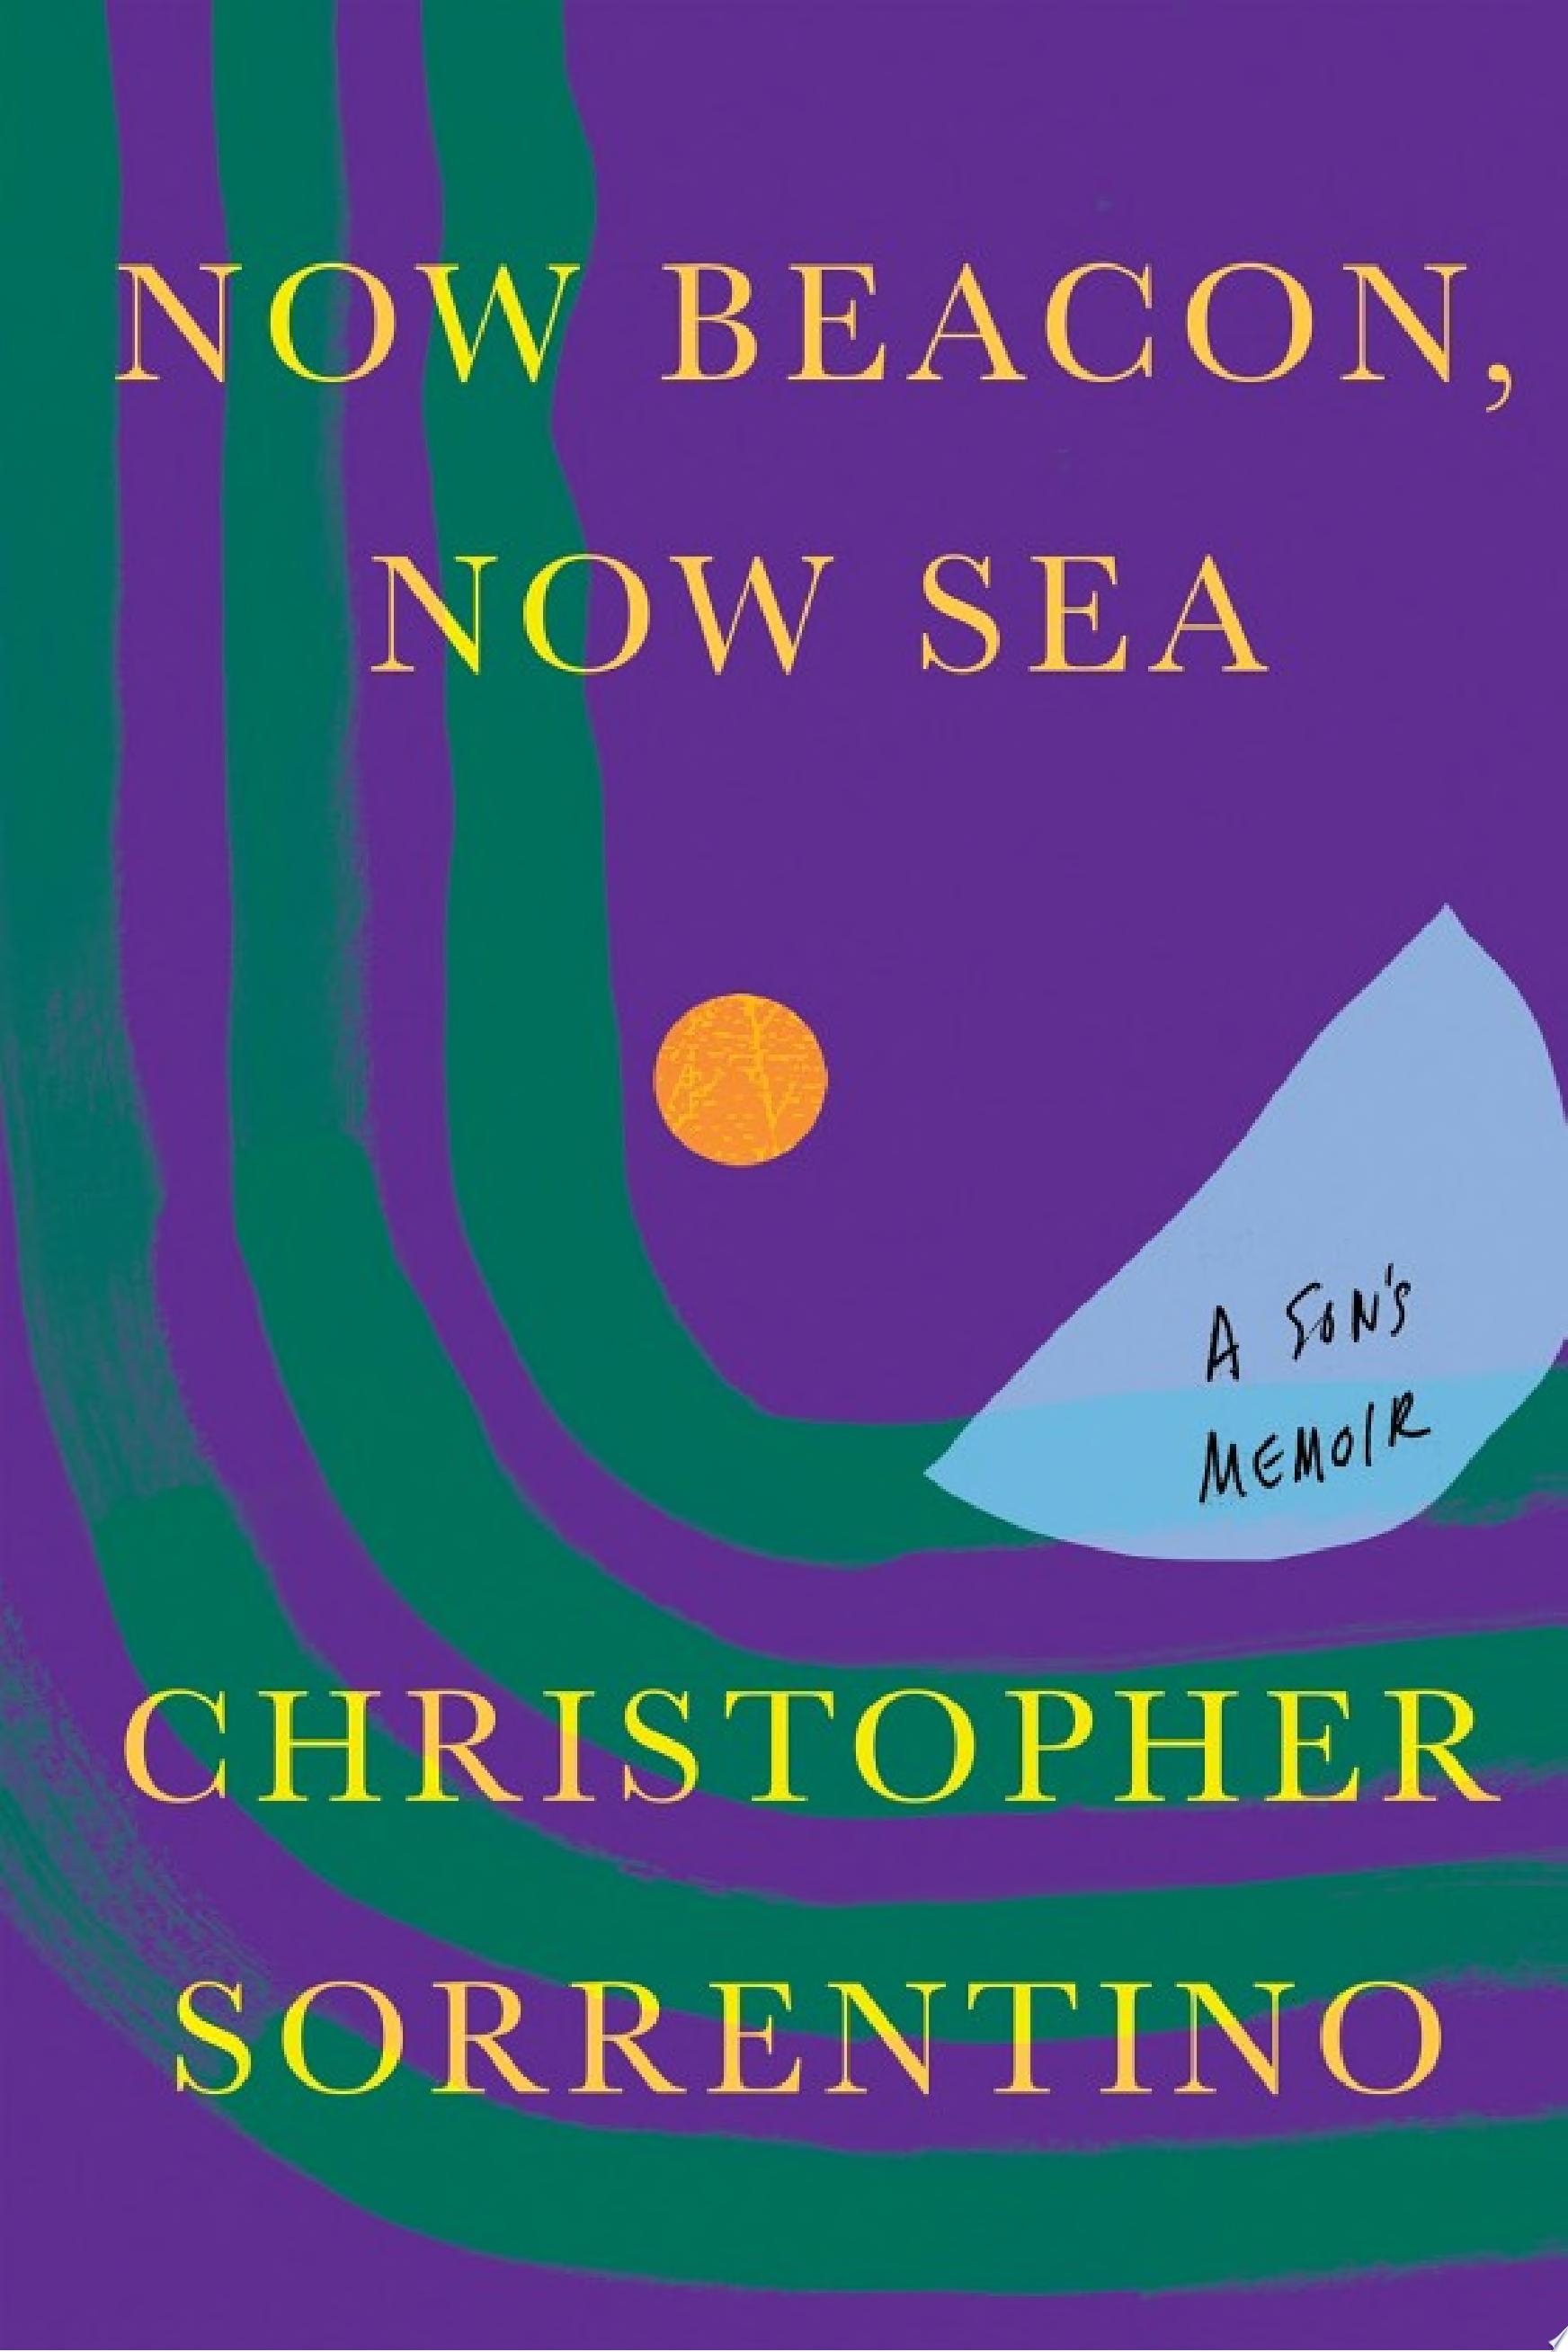 Image for "Now Beacon, Now Sea"